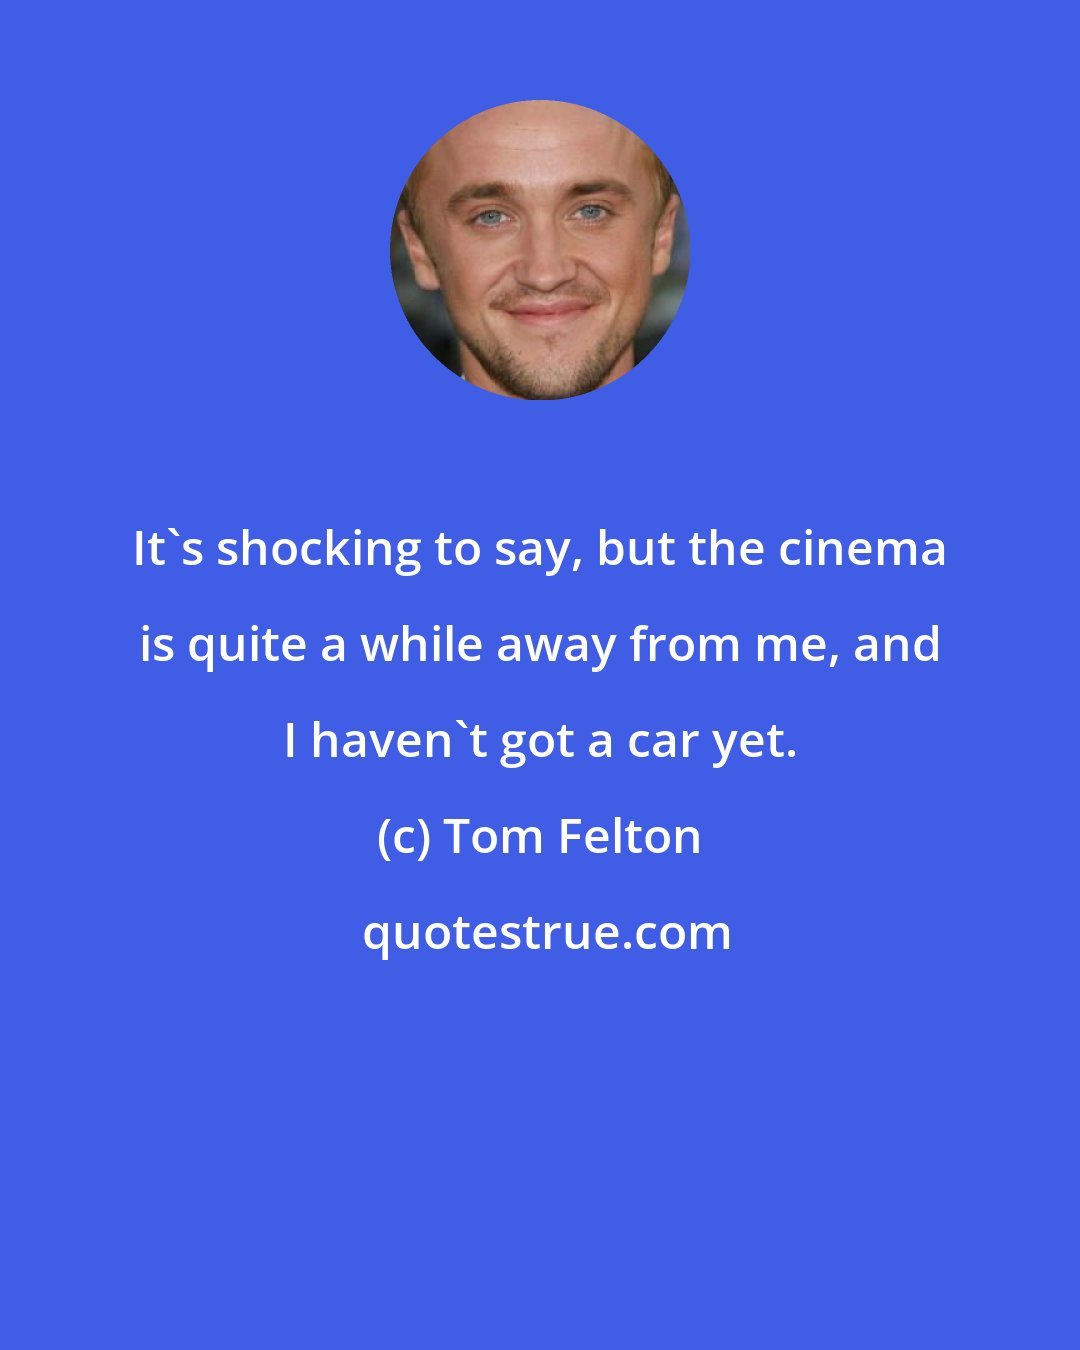 Tom Felton: It's shocking to say, but the cinema is quite a while away from me, and I haven't got a car yet.